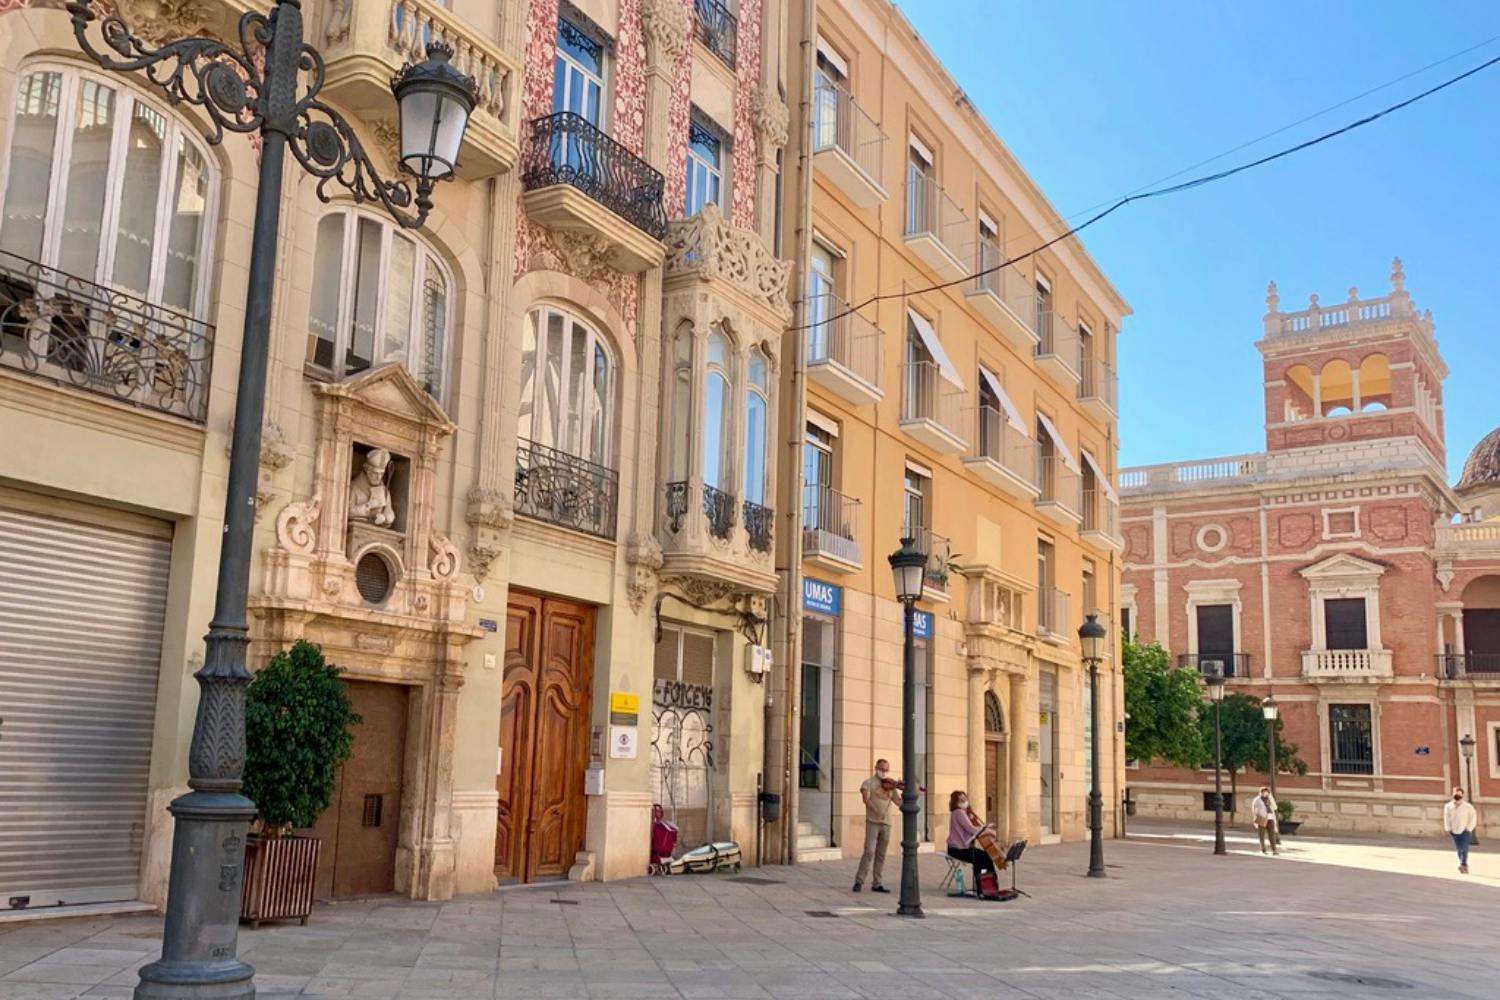 Self guided discovery walk in Valencia and the Old Quarter Musement